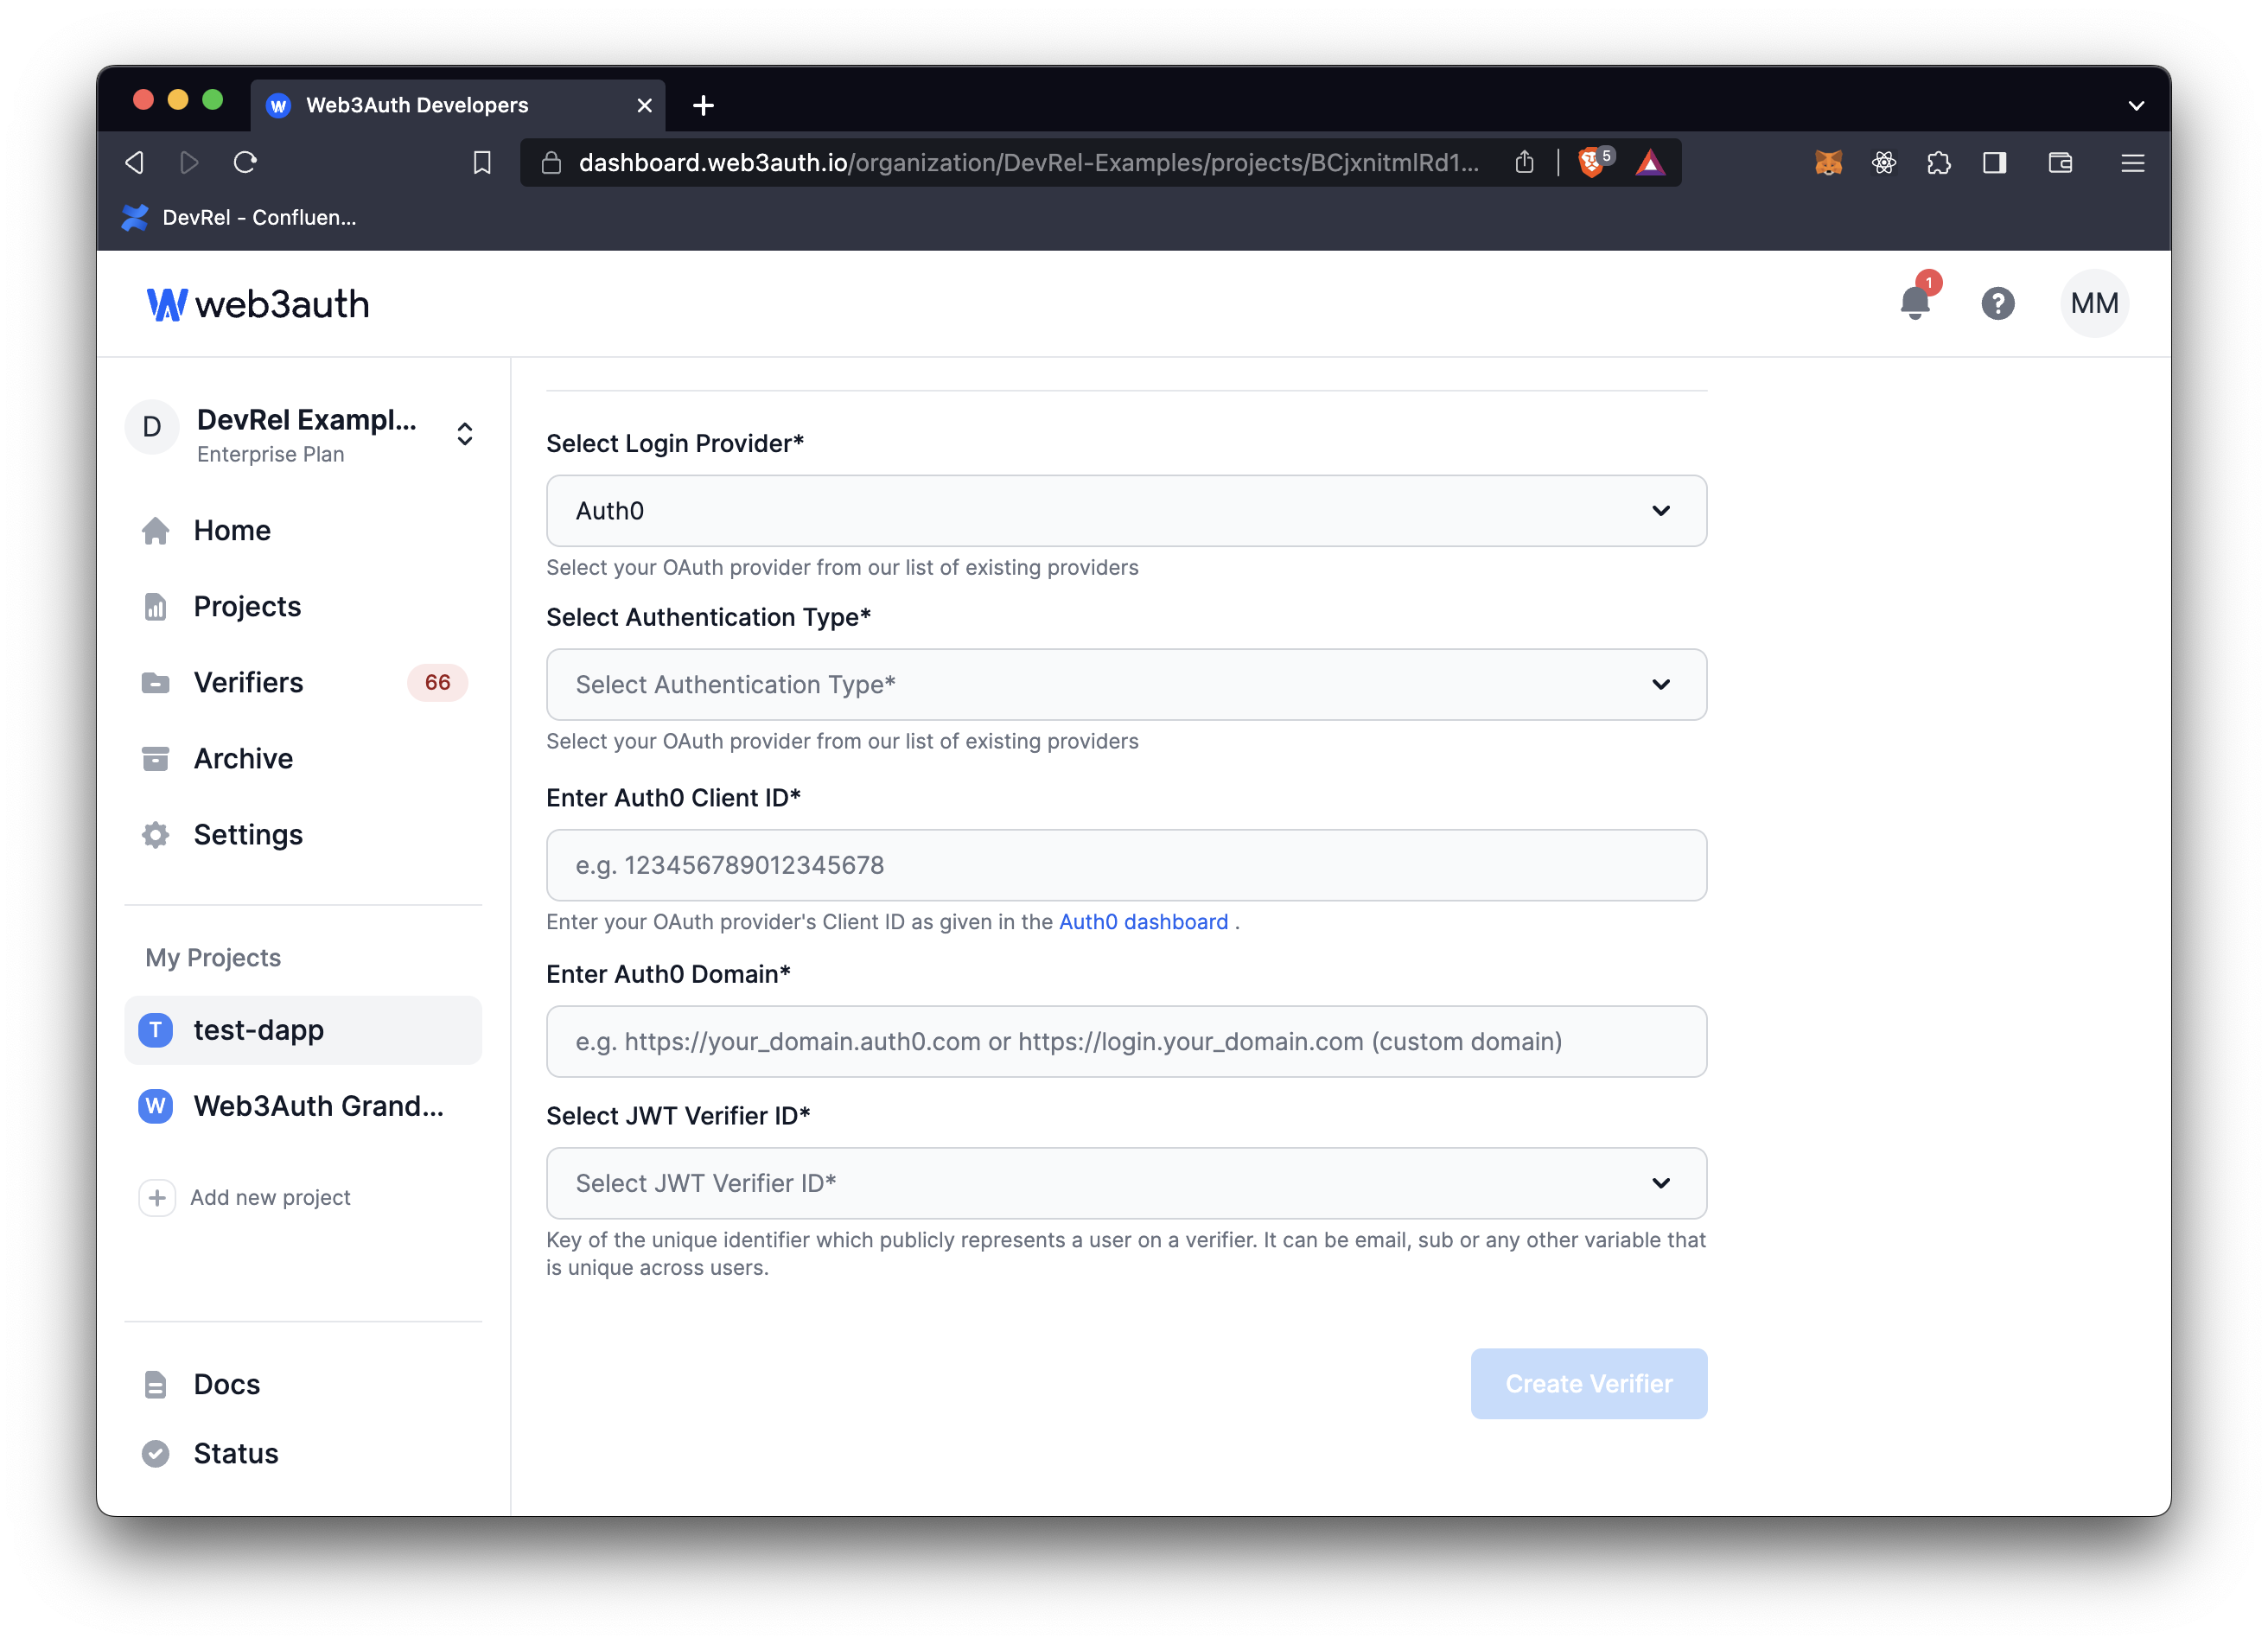 LinkedIn - Auth0 Client ID and Auth0 Domain on Web3Auth Dashboard